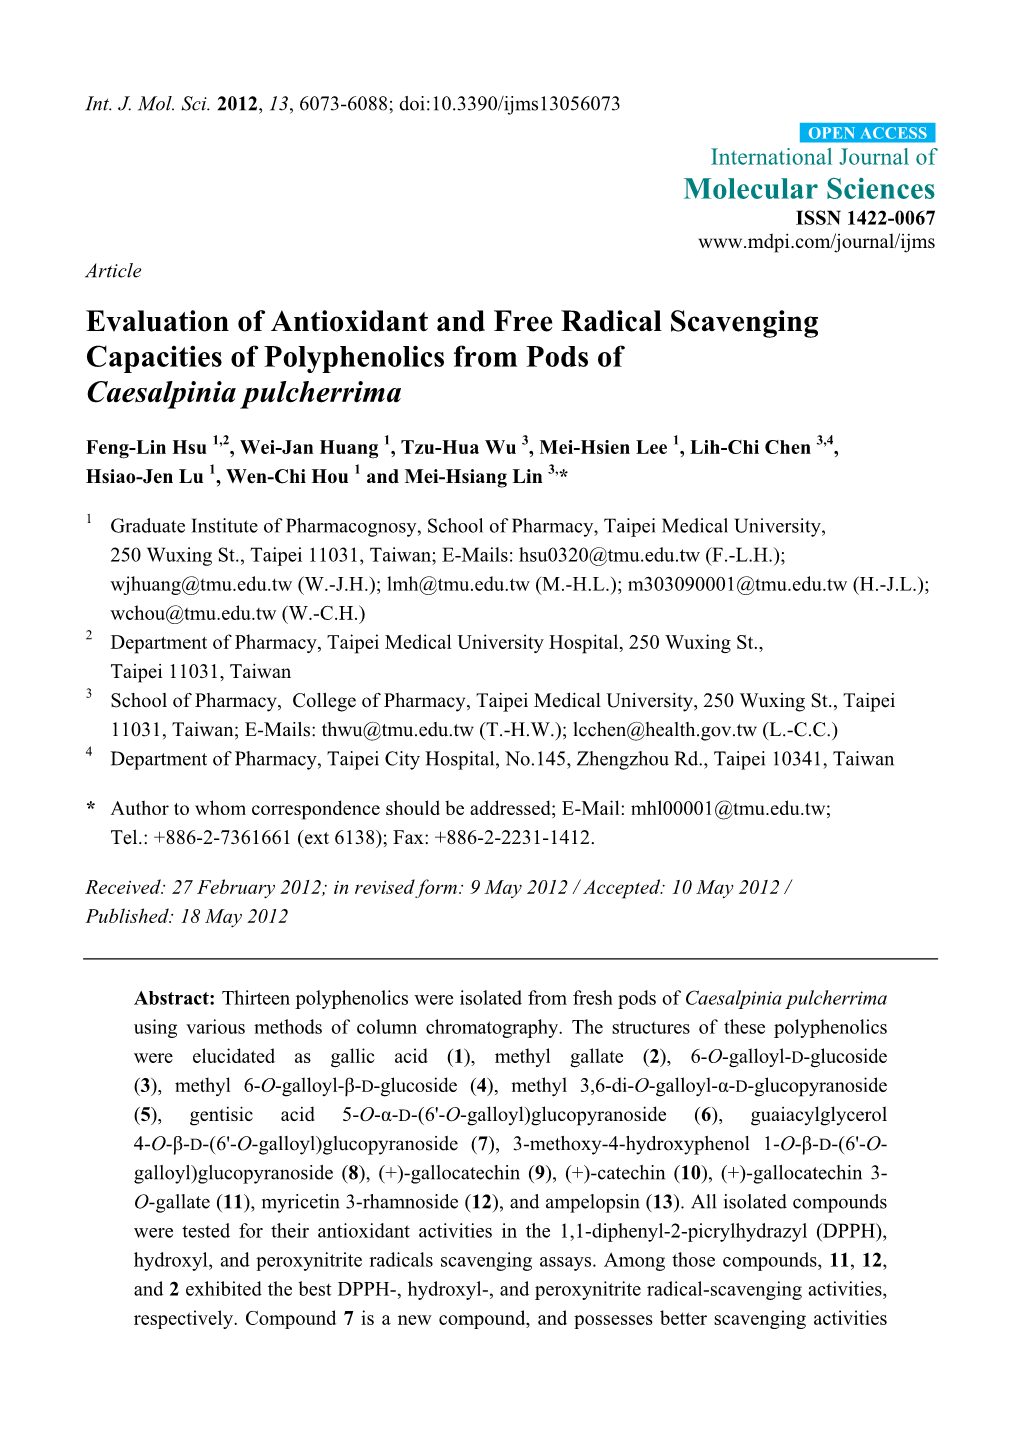 Evaluation of Antioxidant and Free Radical Scavenging Capacities of Polyphenolics from Pods of Caesalpinia Pulcherrima